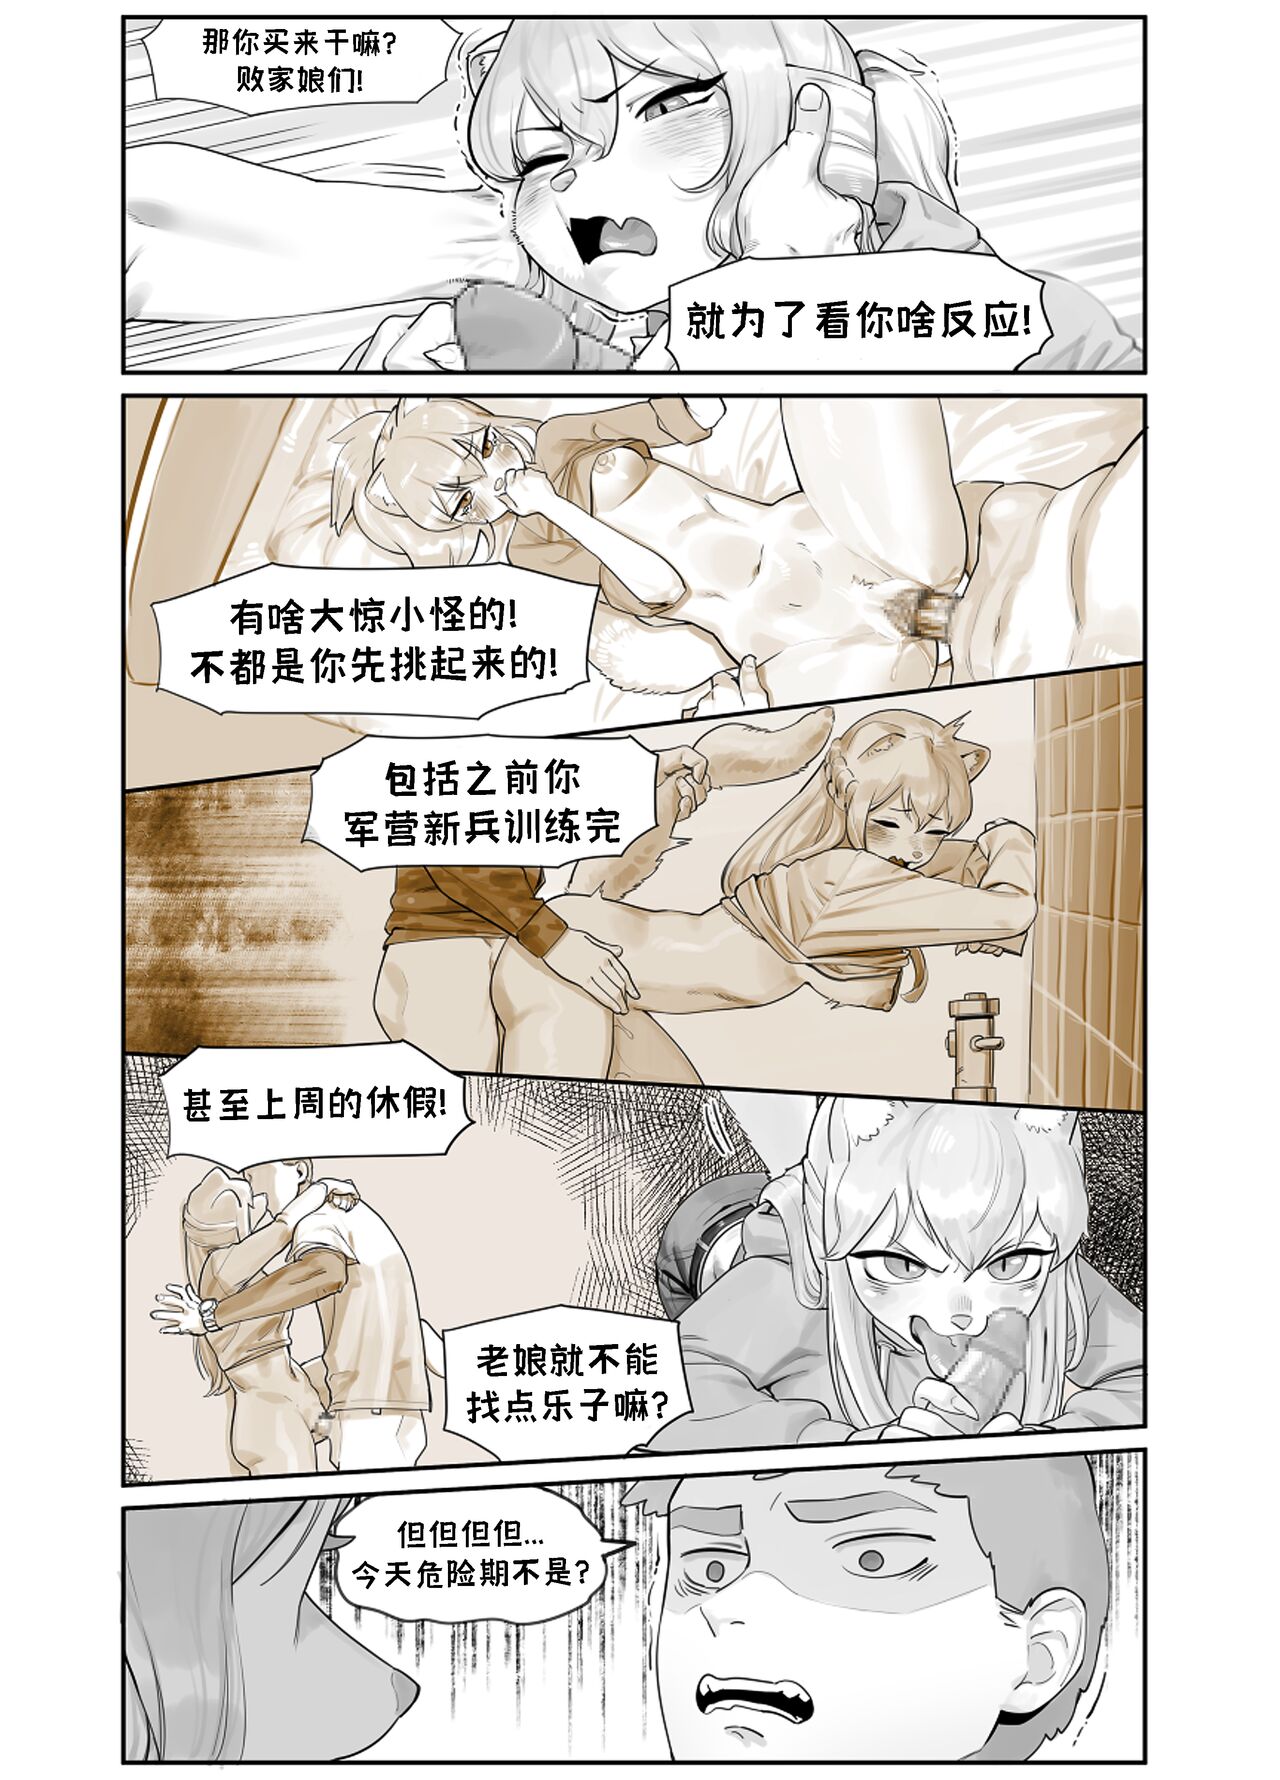 [Gudl] A Suspiciously Erotic Childhood Friend (Pixiv)《可疑瑟瑟青梅竹马》 [Chinese] (Ongoing) 